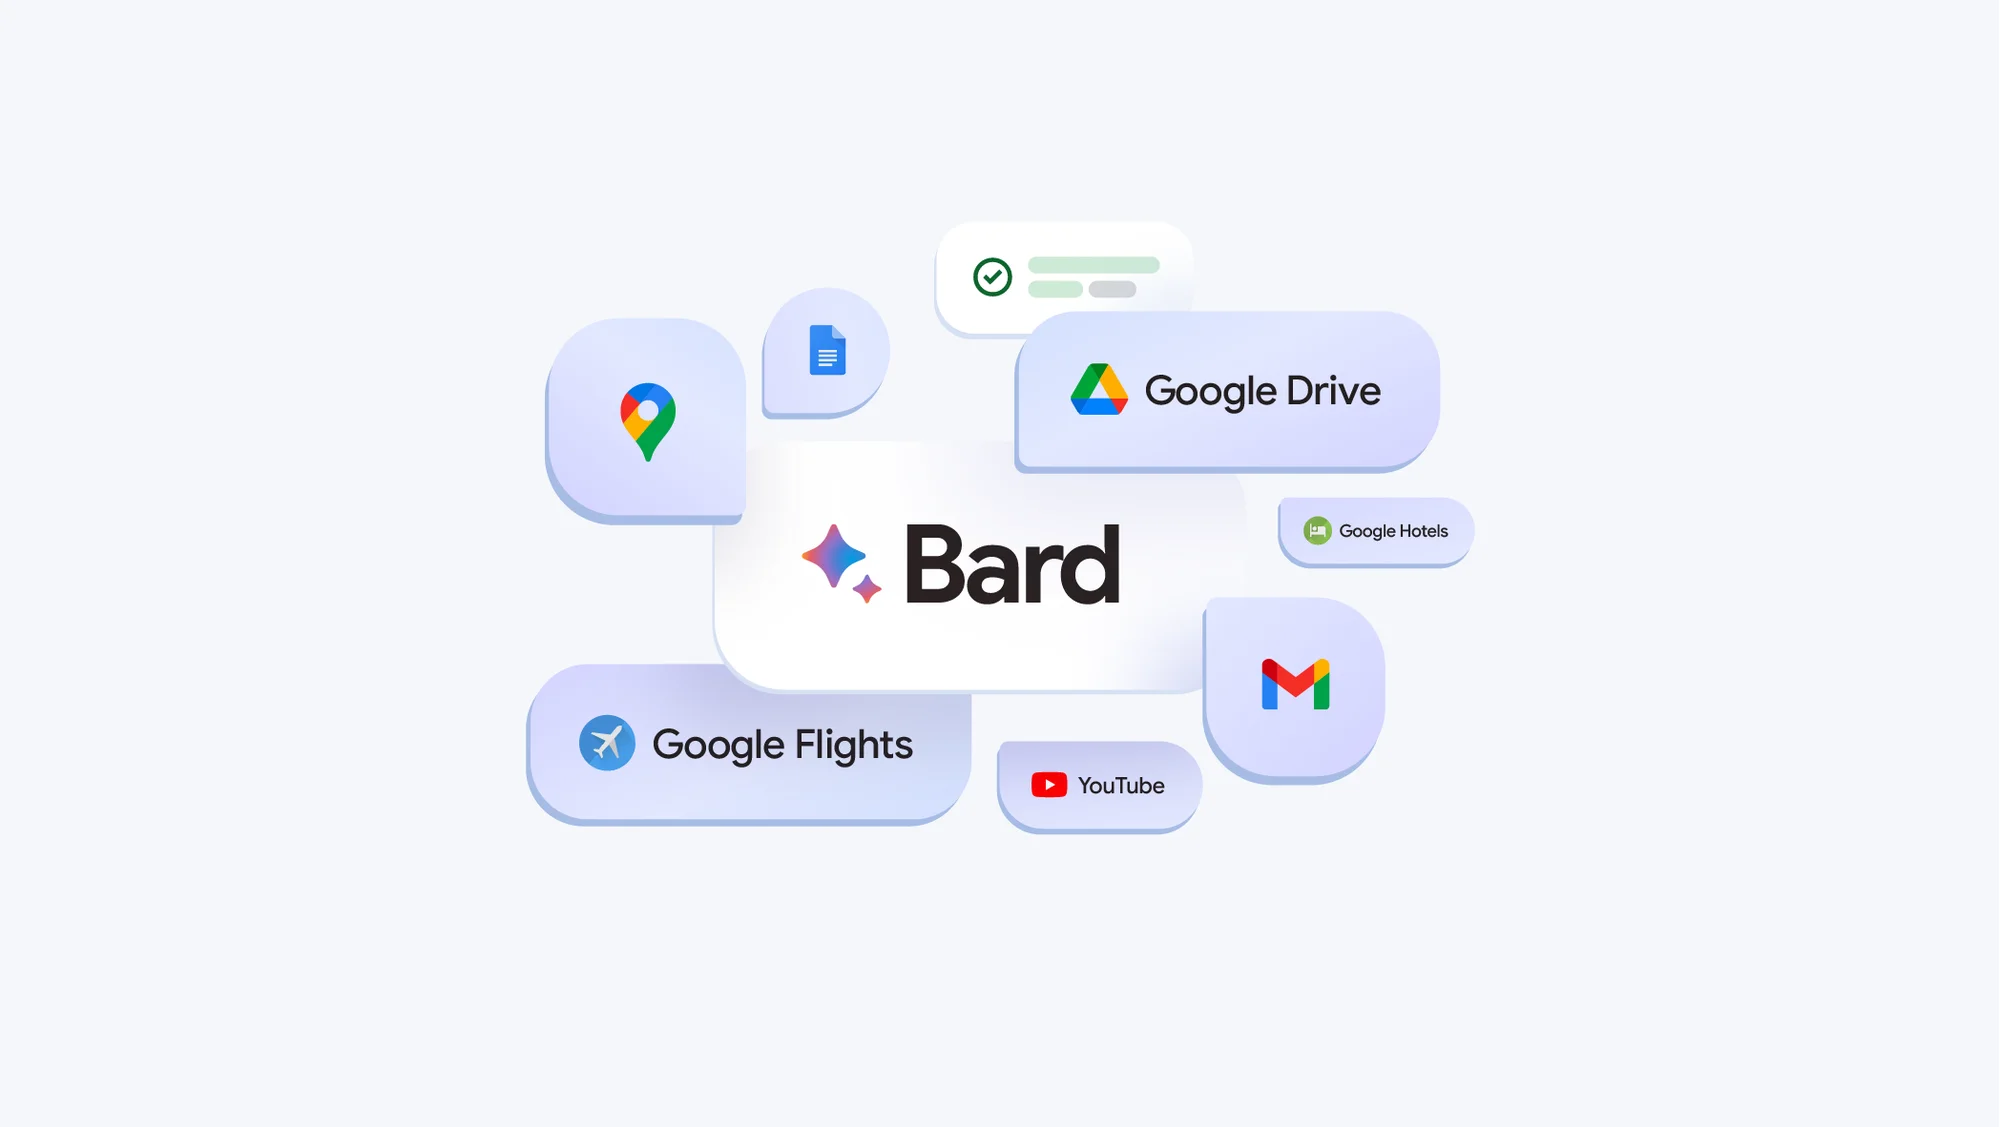 Google Bard September update: App extensions and new features